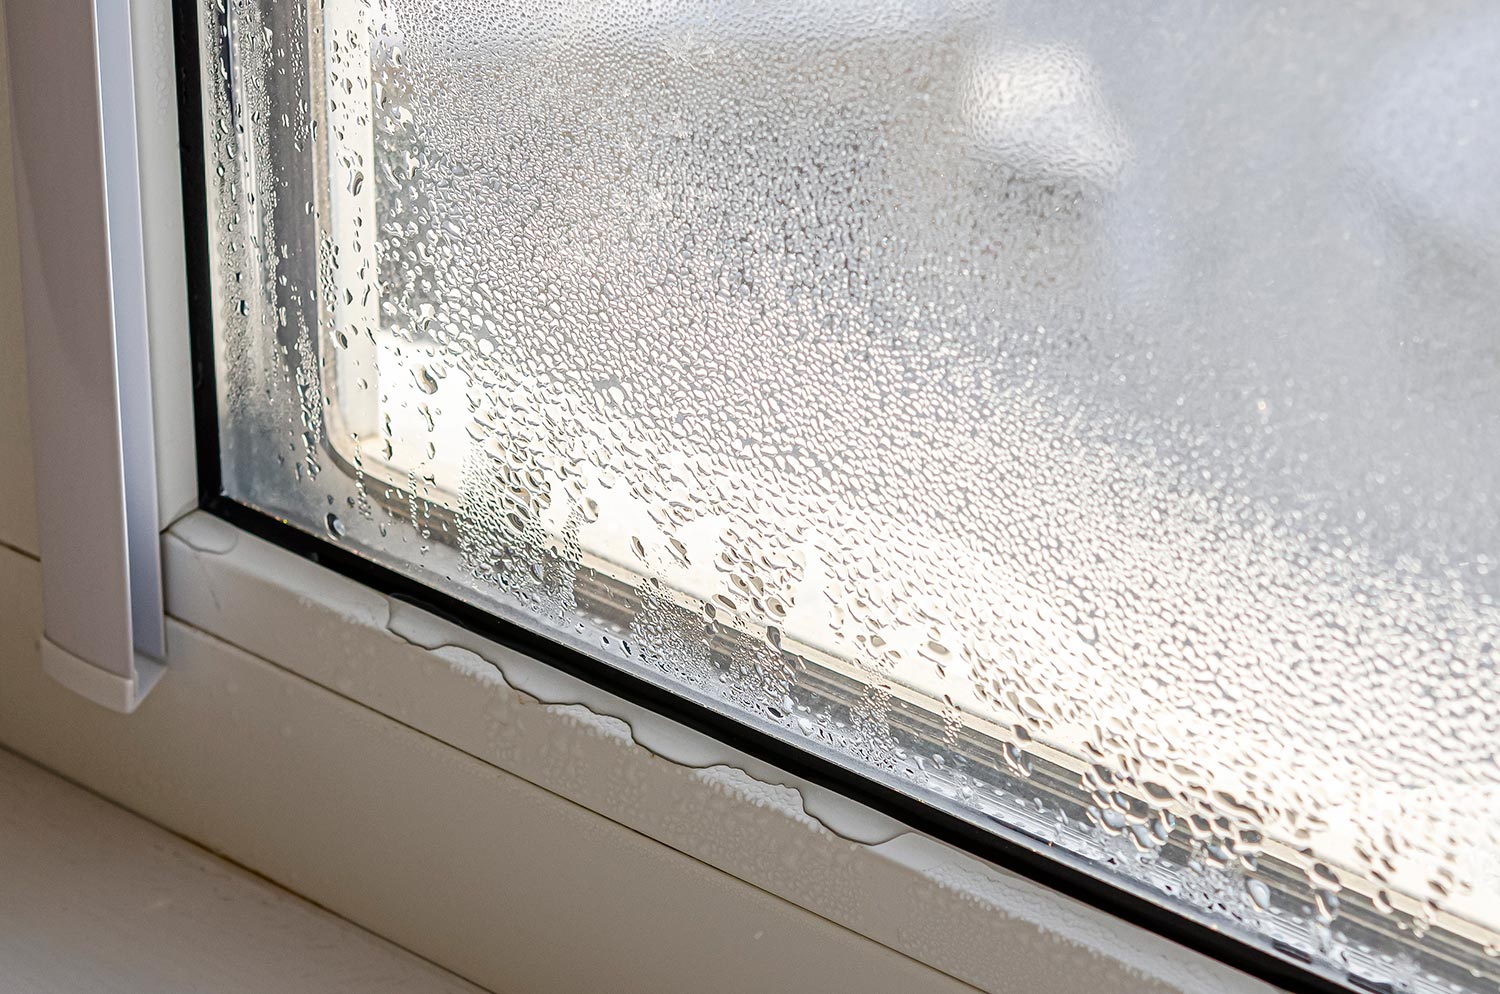 Drops of condensate and black mold on a substandard metal-plastic window